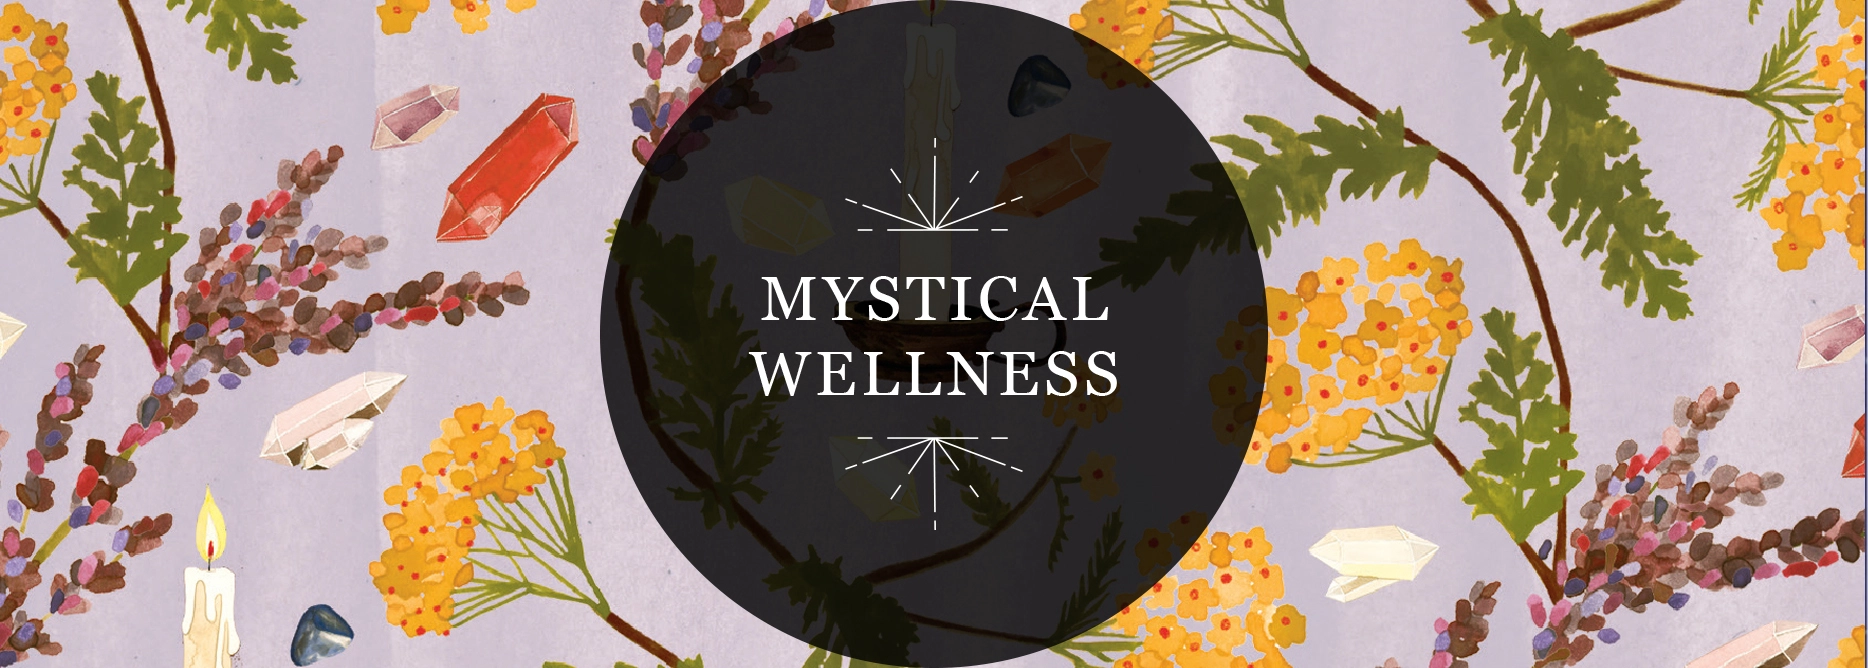 RP Mystic - Illustrated header image that reads 'Mystical Wellness'